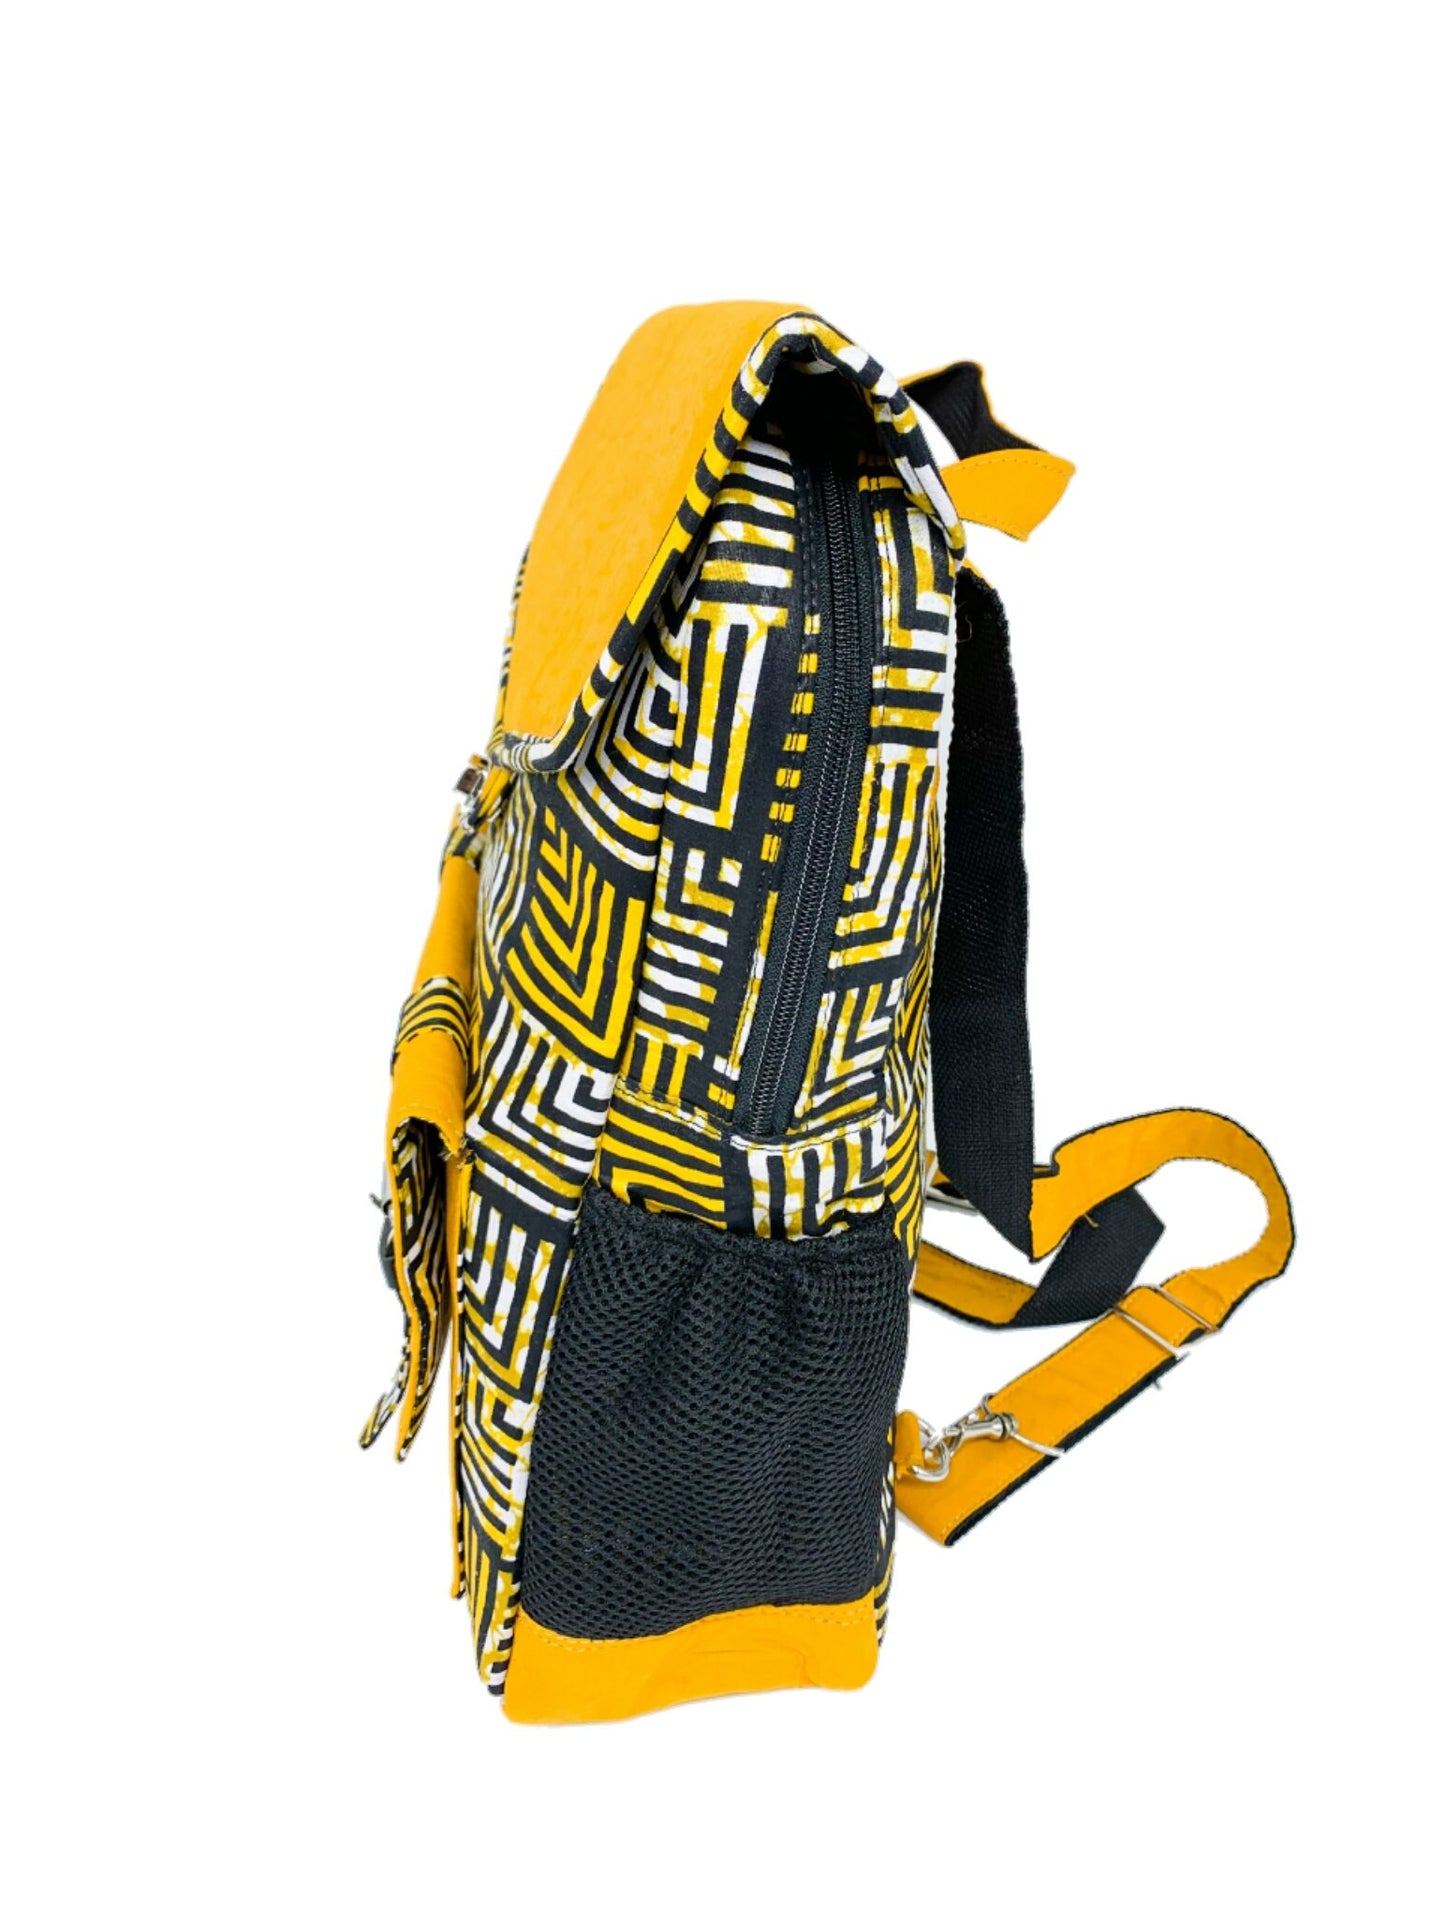 Cute  Backpack with Ankara African Fabric - Weekend Bag for Mom. Boho Tote or Cross Body Duffle , Daughter Birthday, Back to School Gift